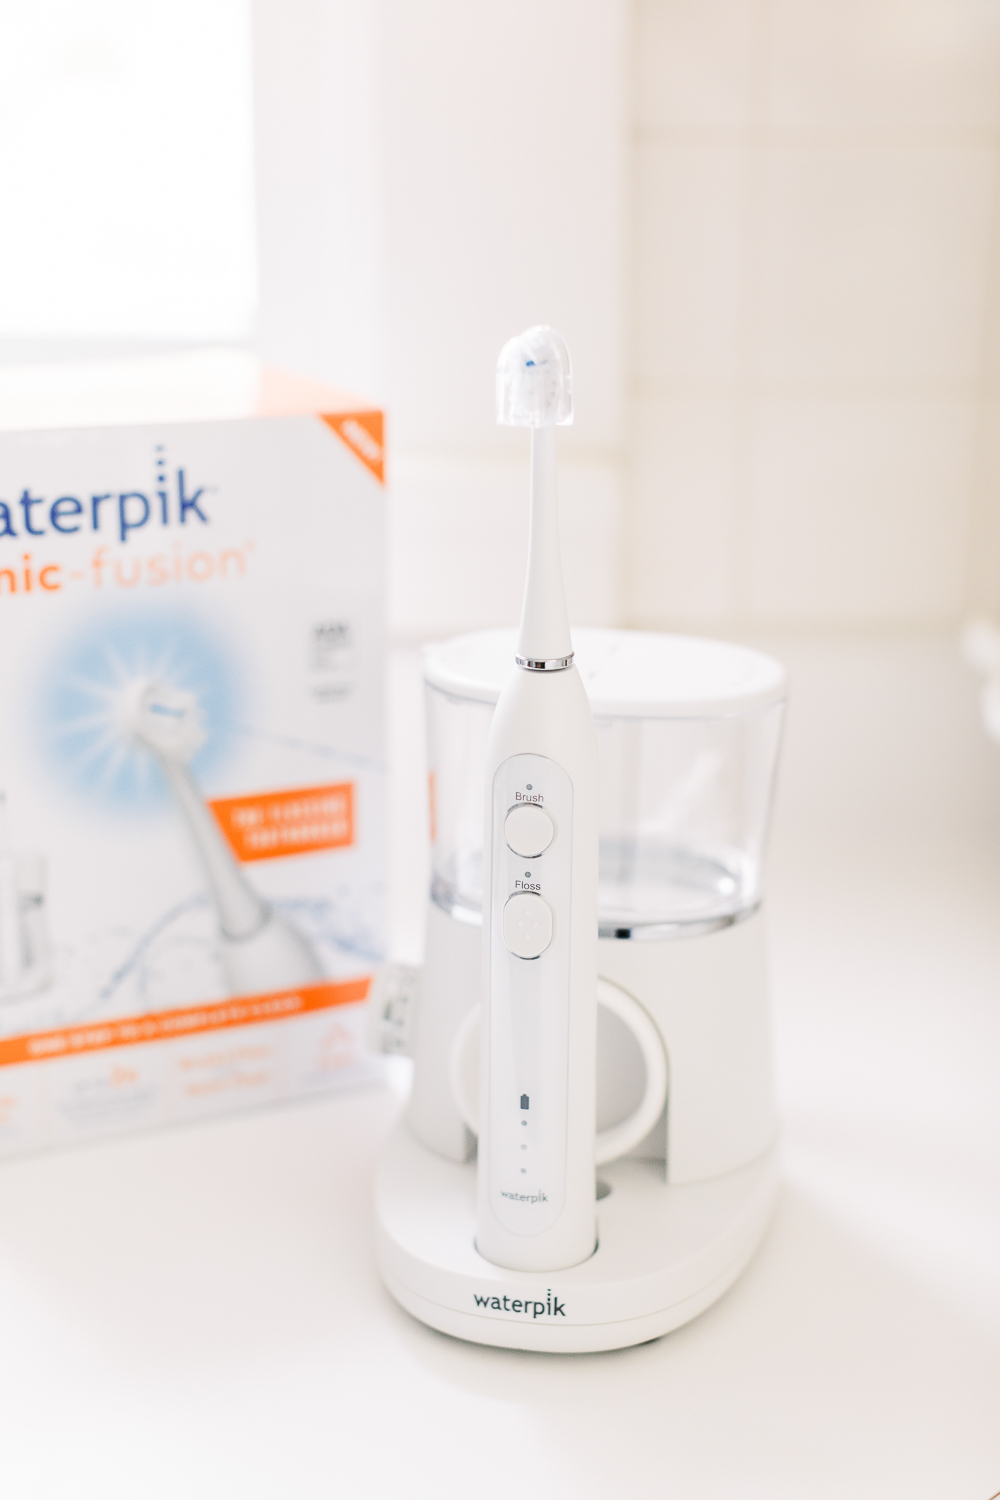 Waterpik Sonic Fusion Flossing Toothbrush, Sonic-Fushion Flossing Toothbrush Review by popular southern lifestyle blogger Stephanie Ziajka from Diary of a Debutante, morning self-care routine, drinking coffee on the couch, pink silk pajama set